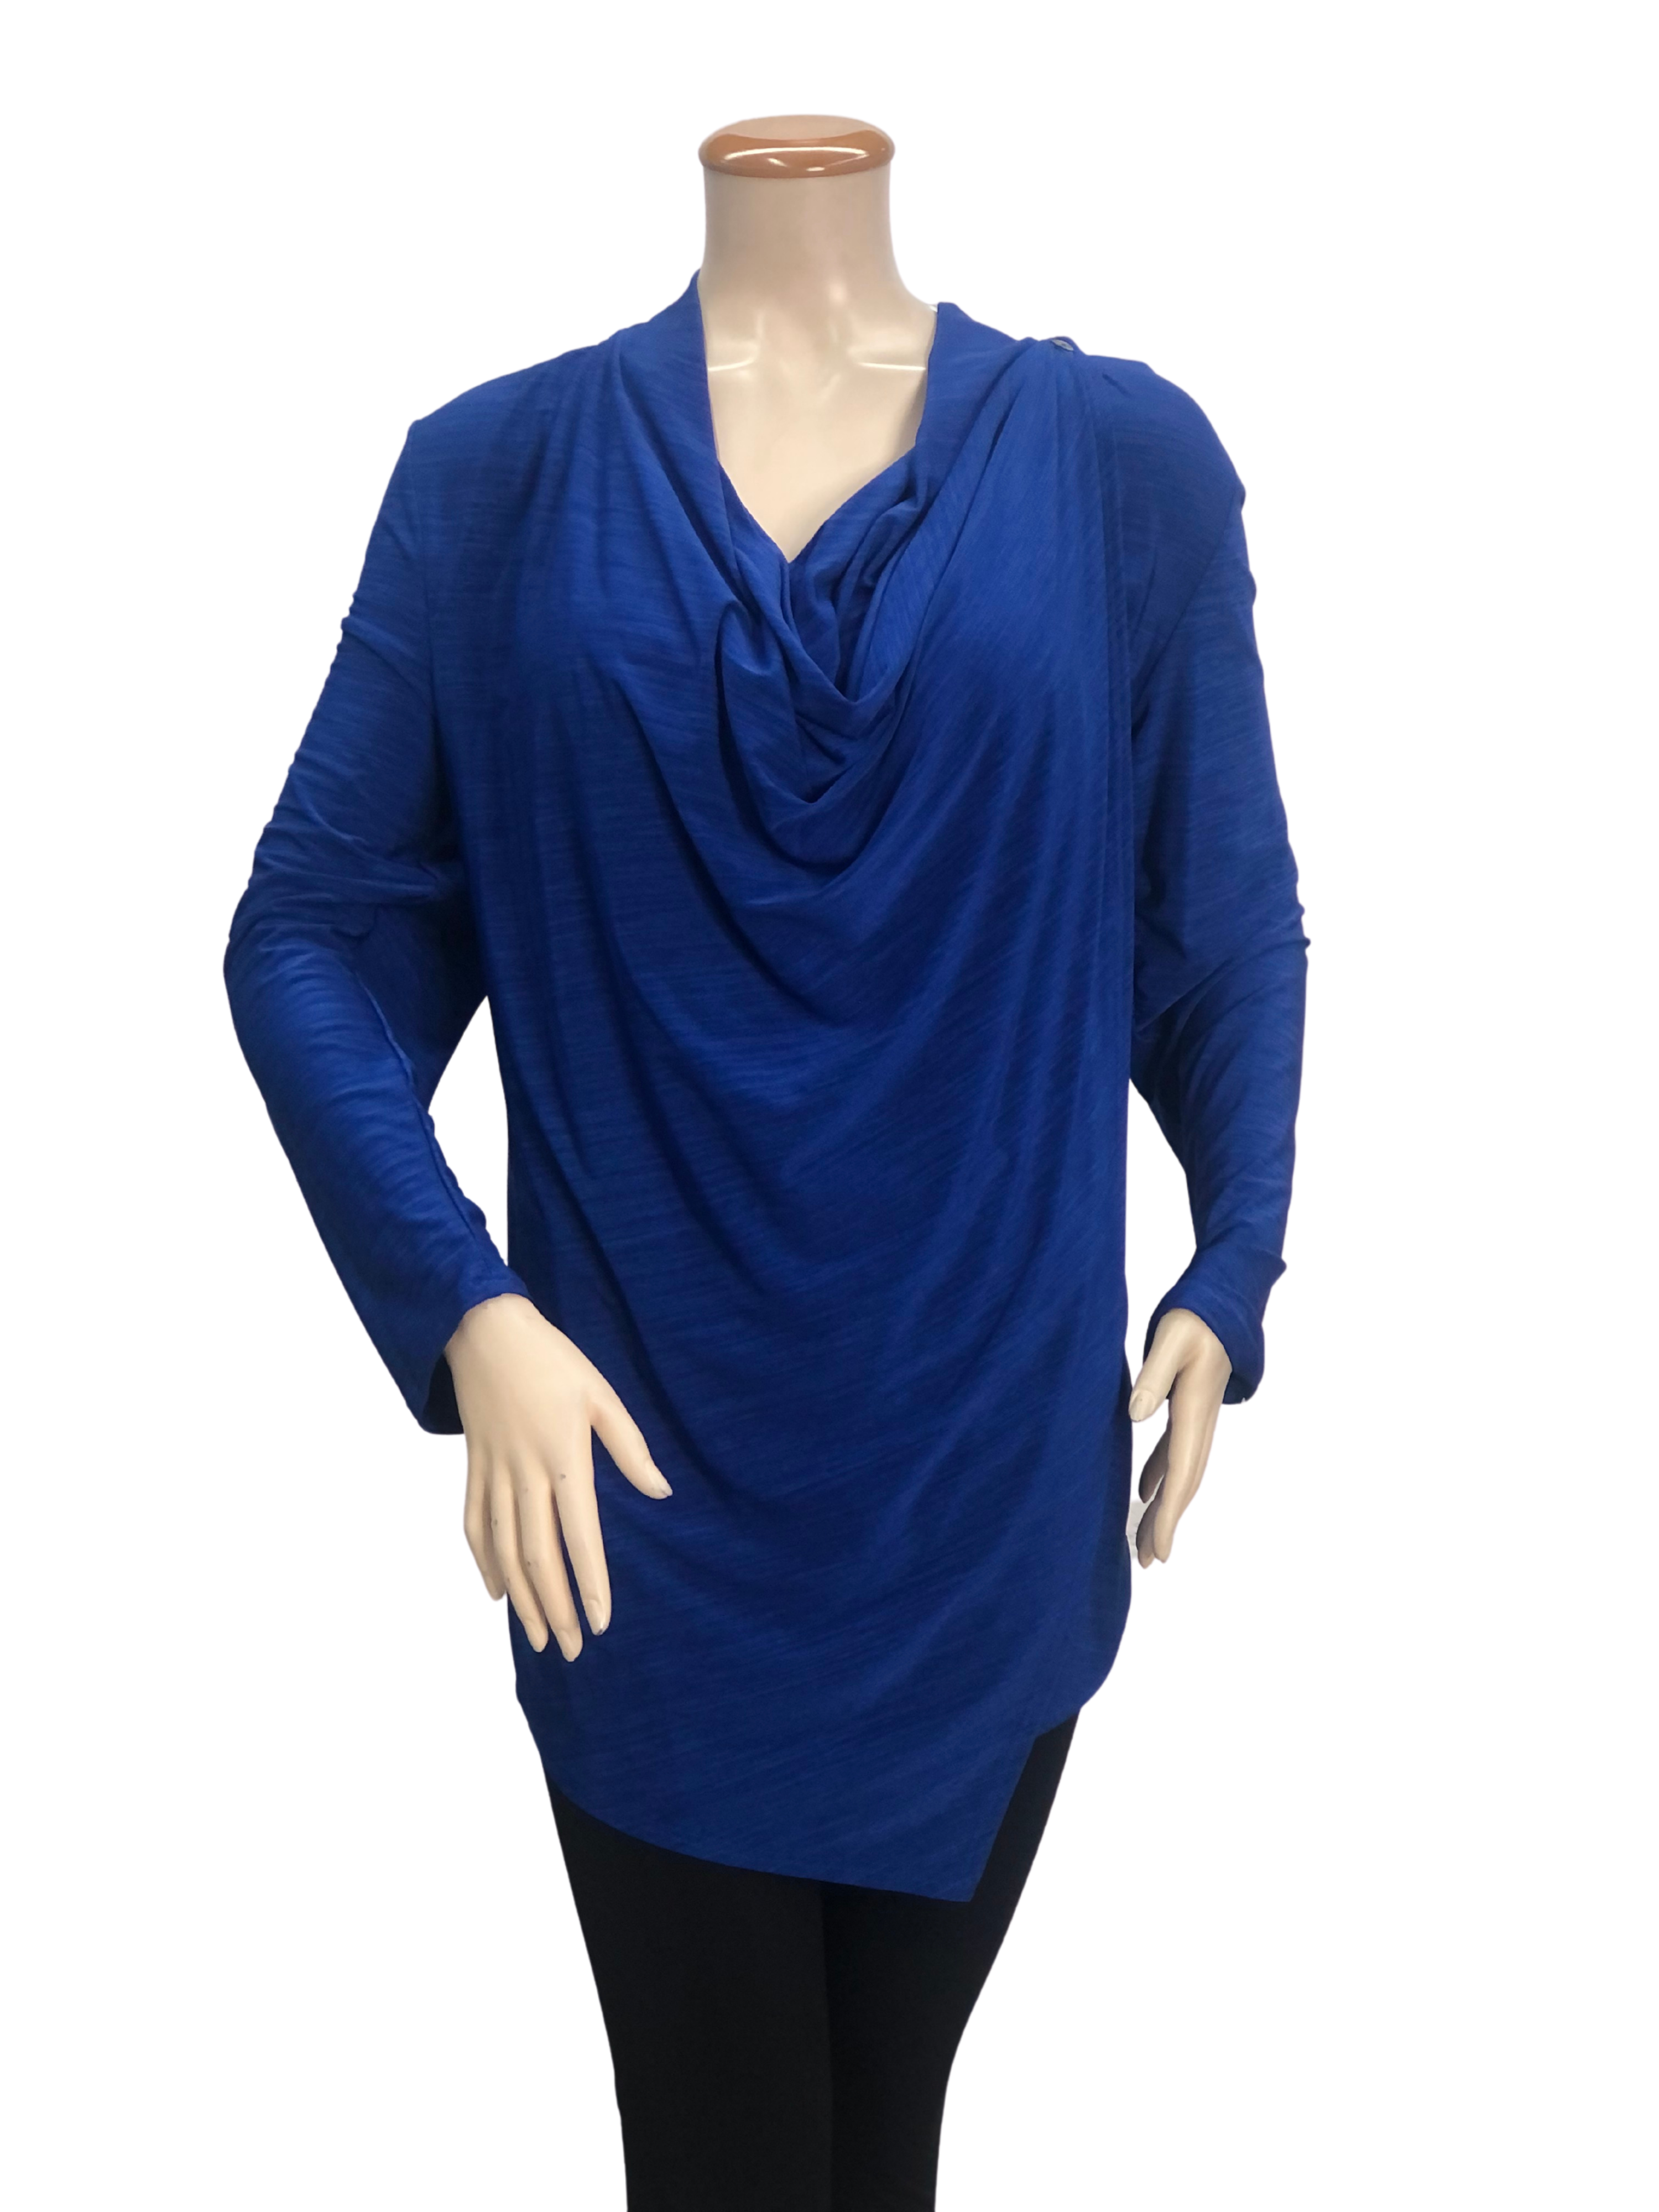 FASHQUE - Multi way Top Style, convertible top - T315 SALE